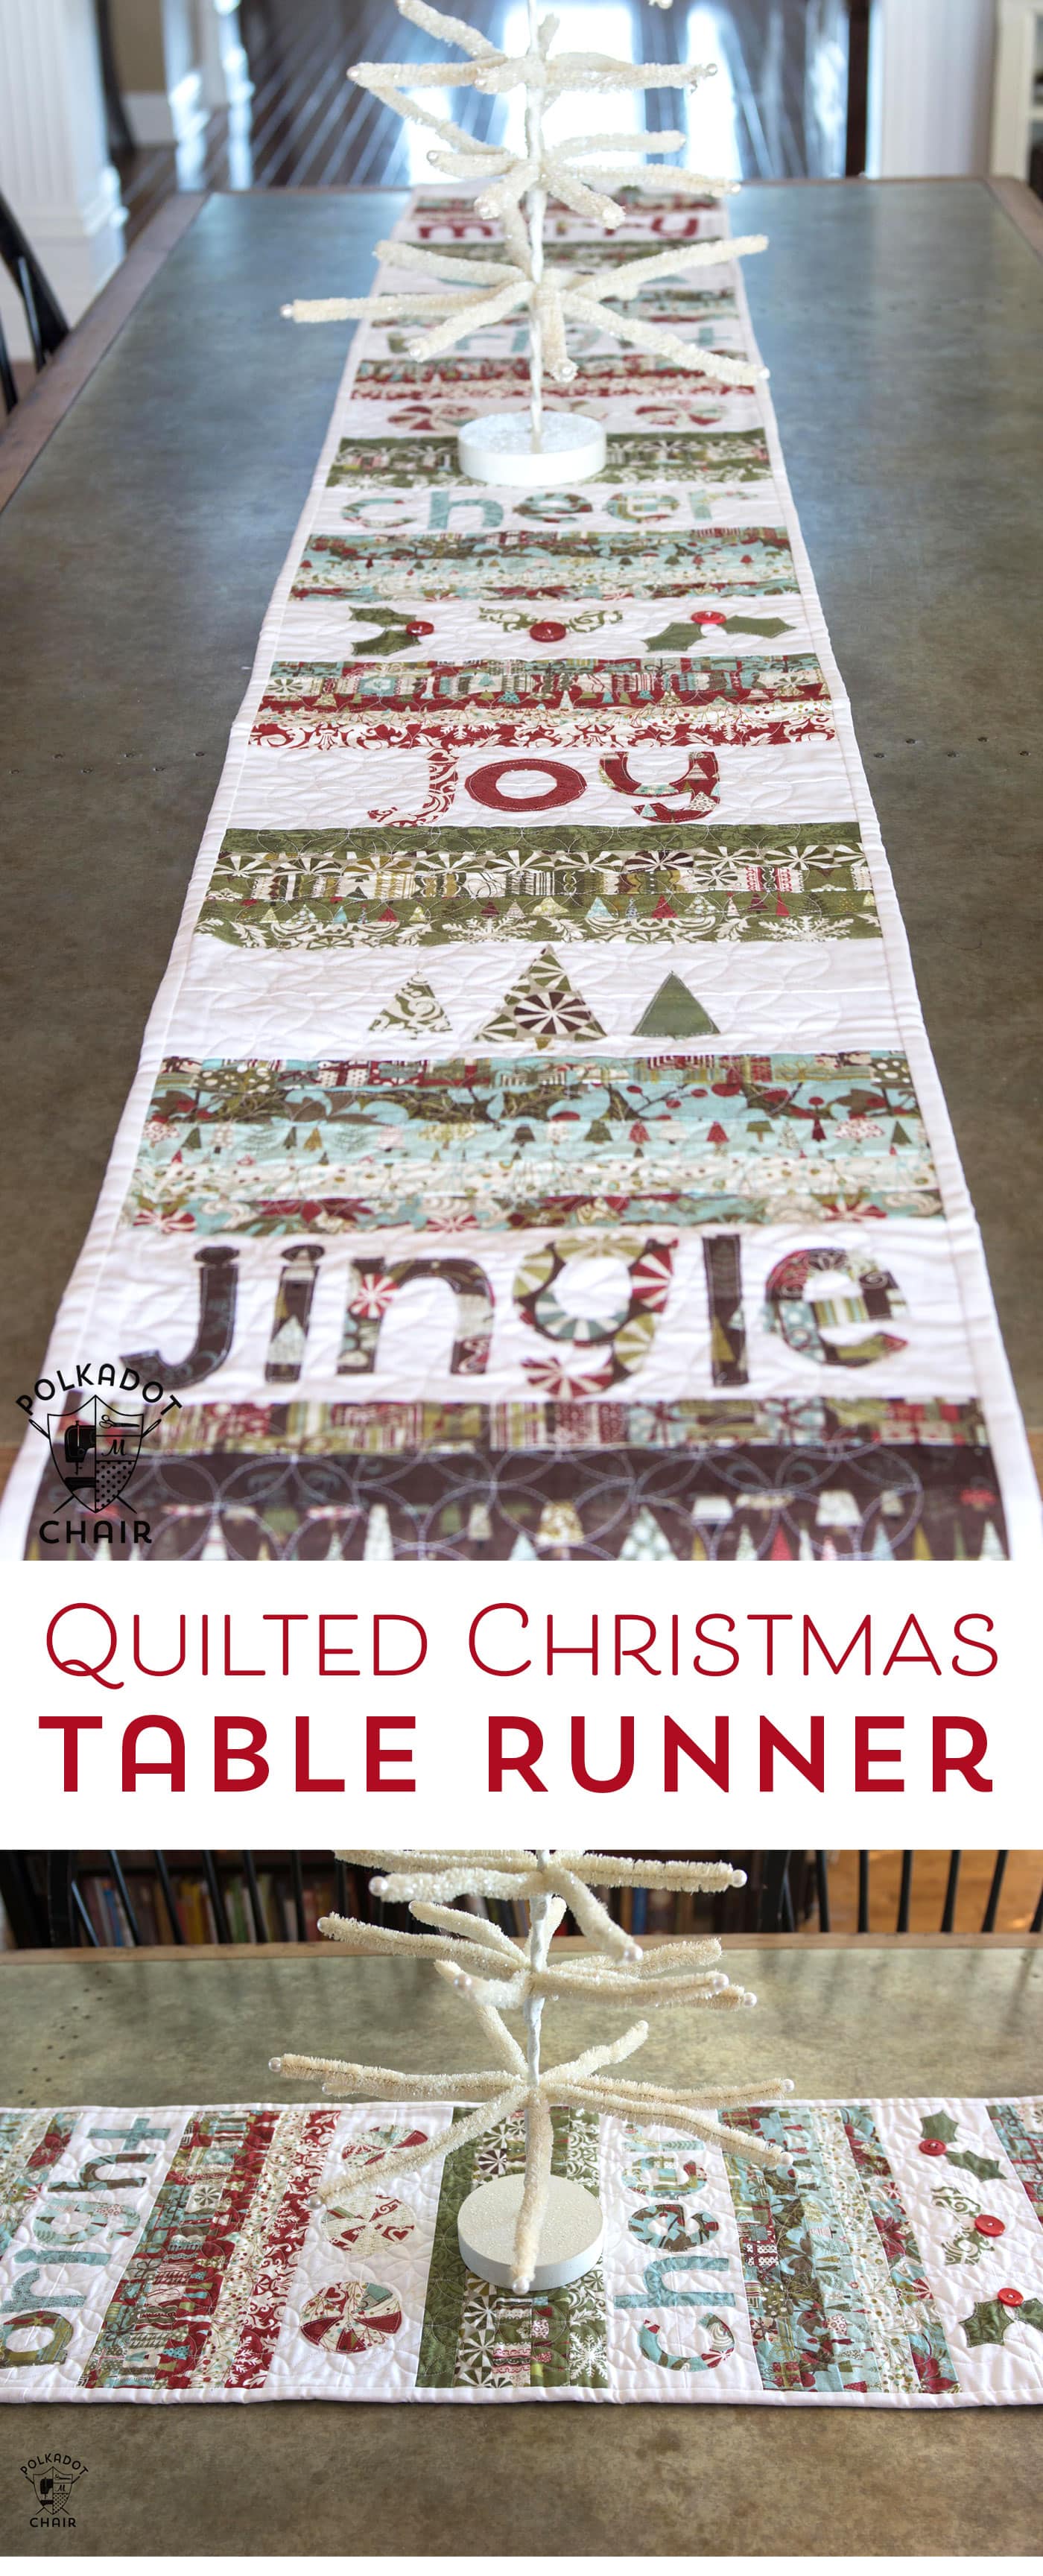 Merry & Cheer Quilted Christmas Table Runner Pattern - The Polka Dot Chair